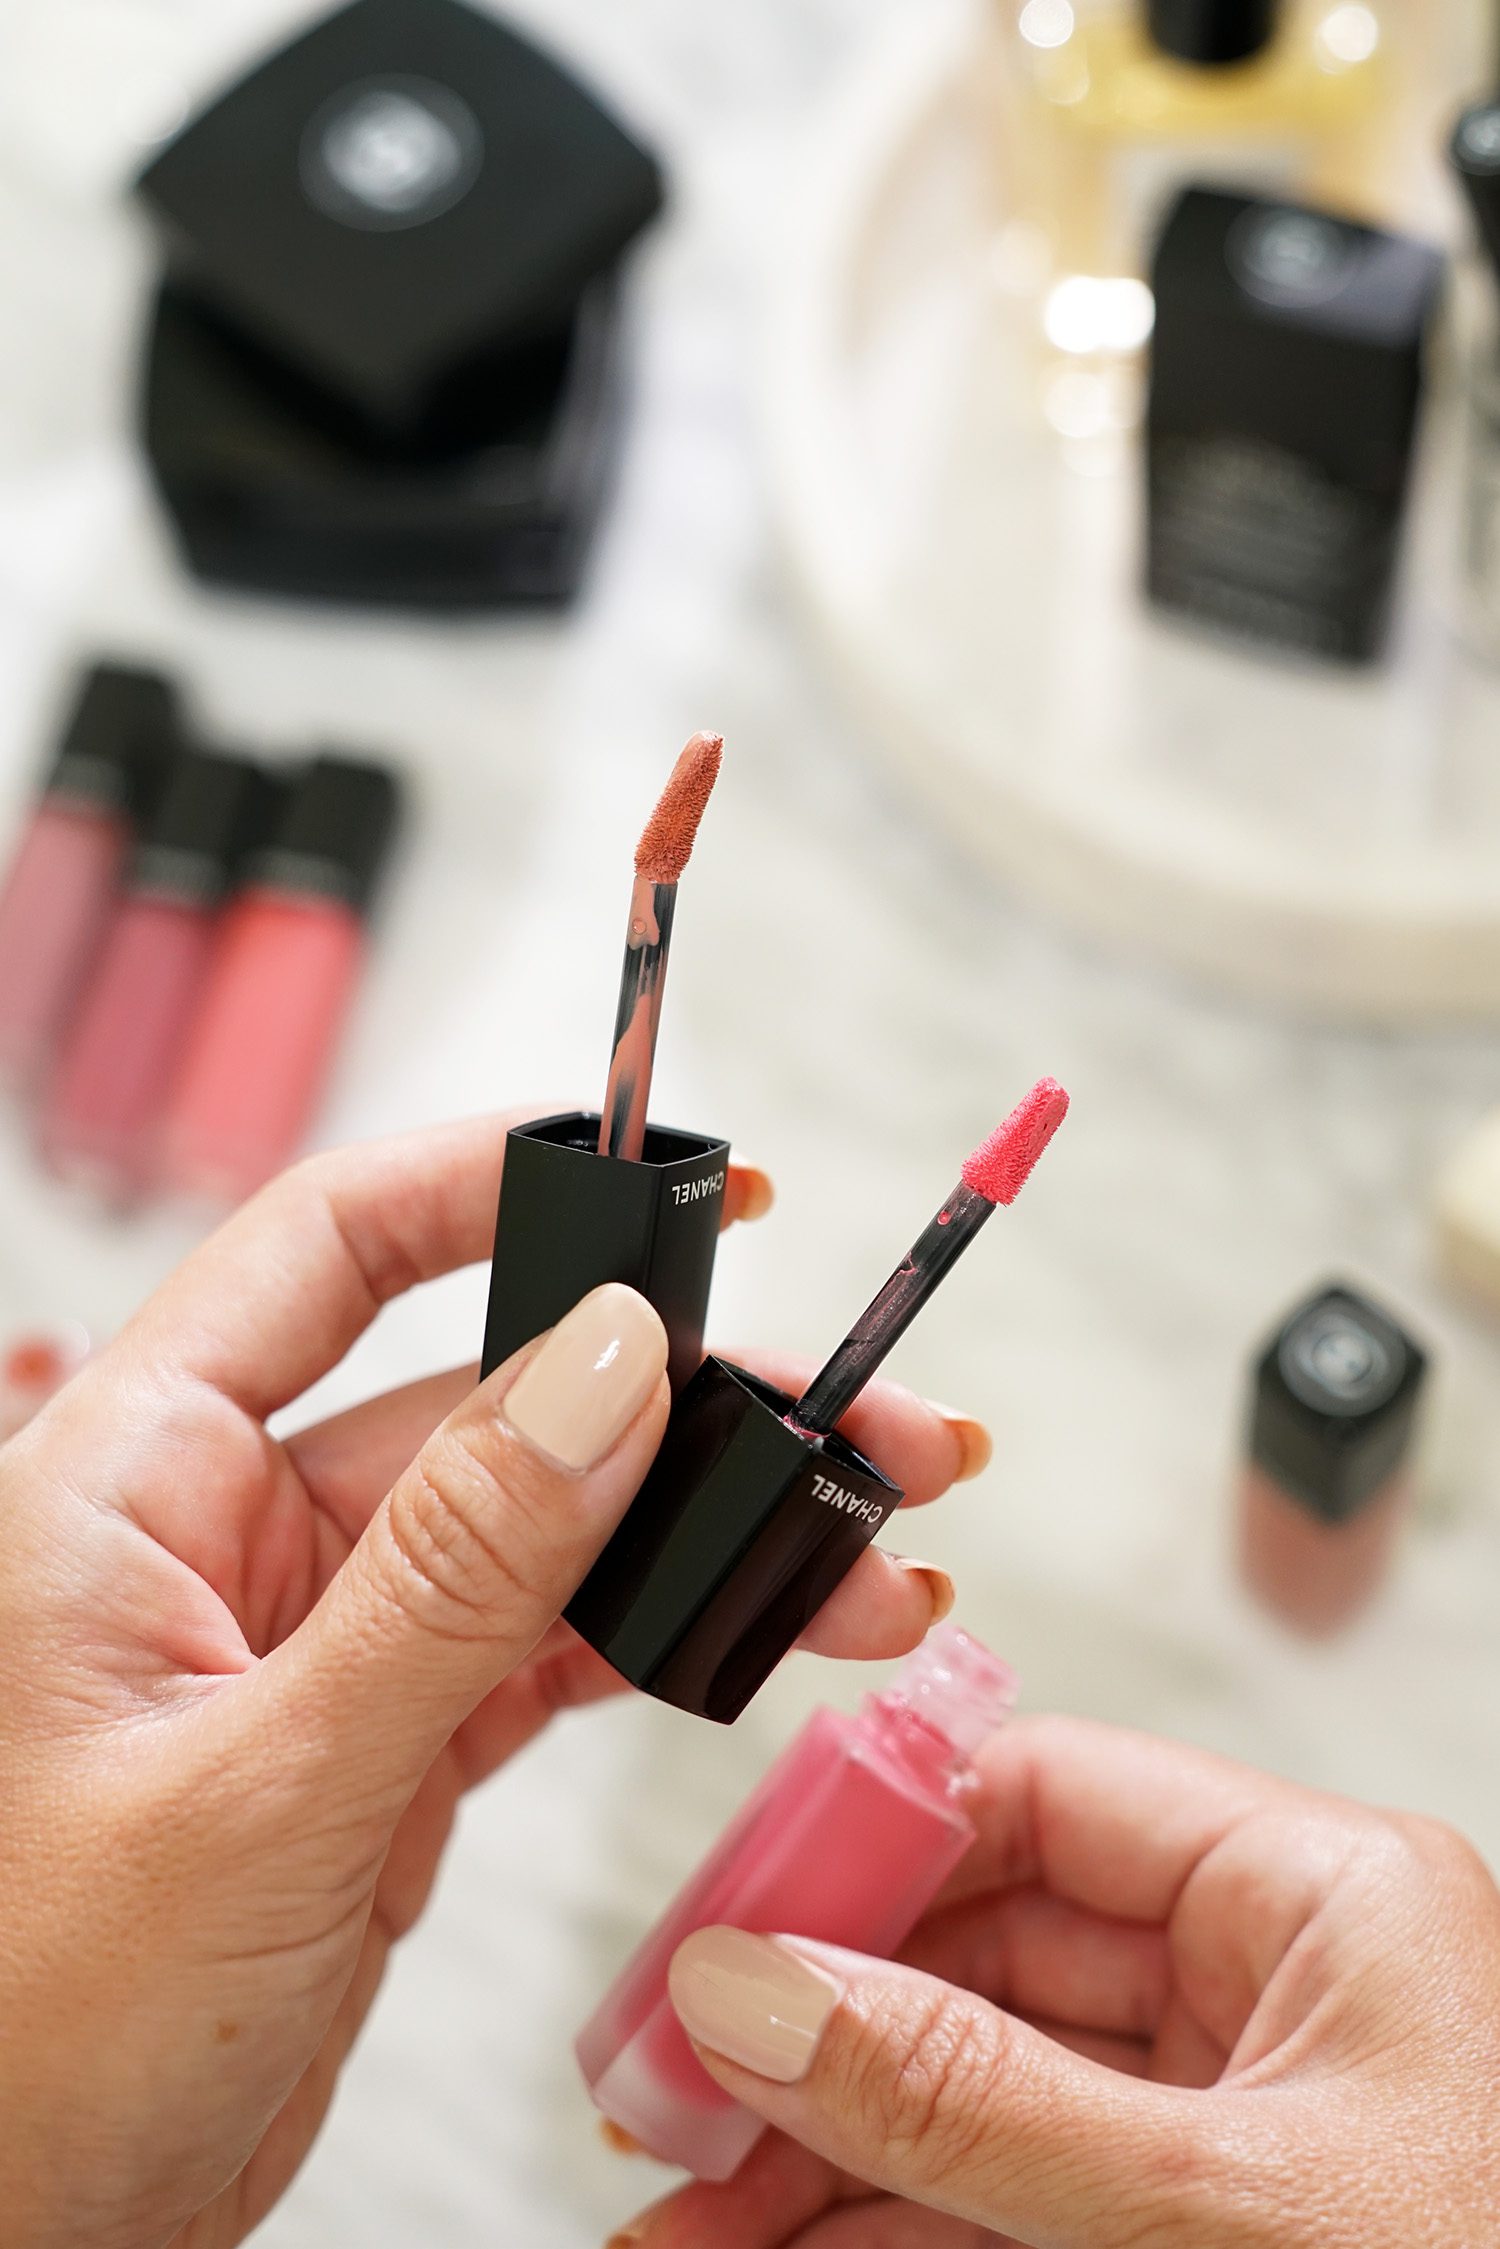 Chanel Rouge Allure Ink Fusion, Rouge Allure Ink + Le Rouge Duo